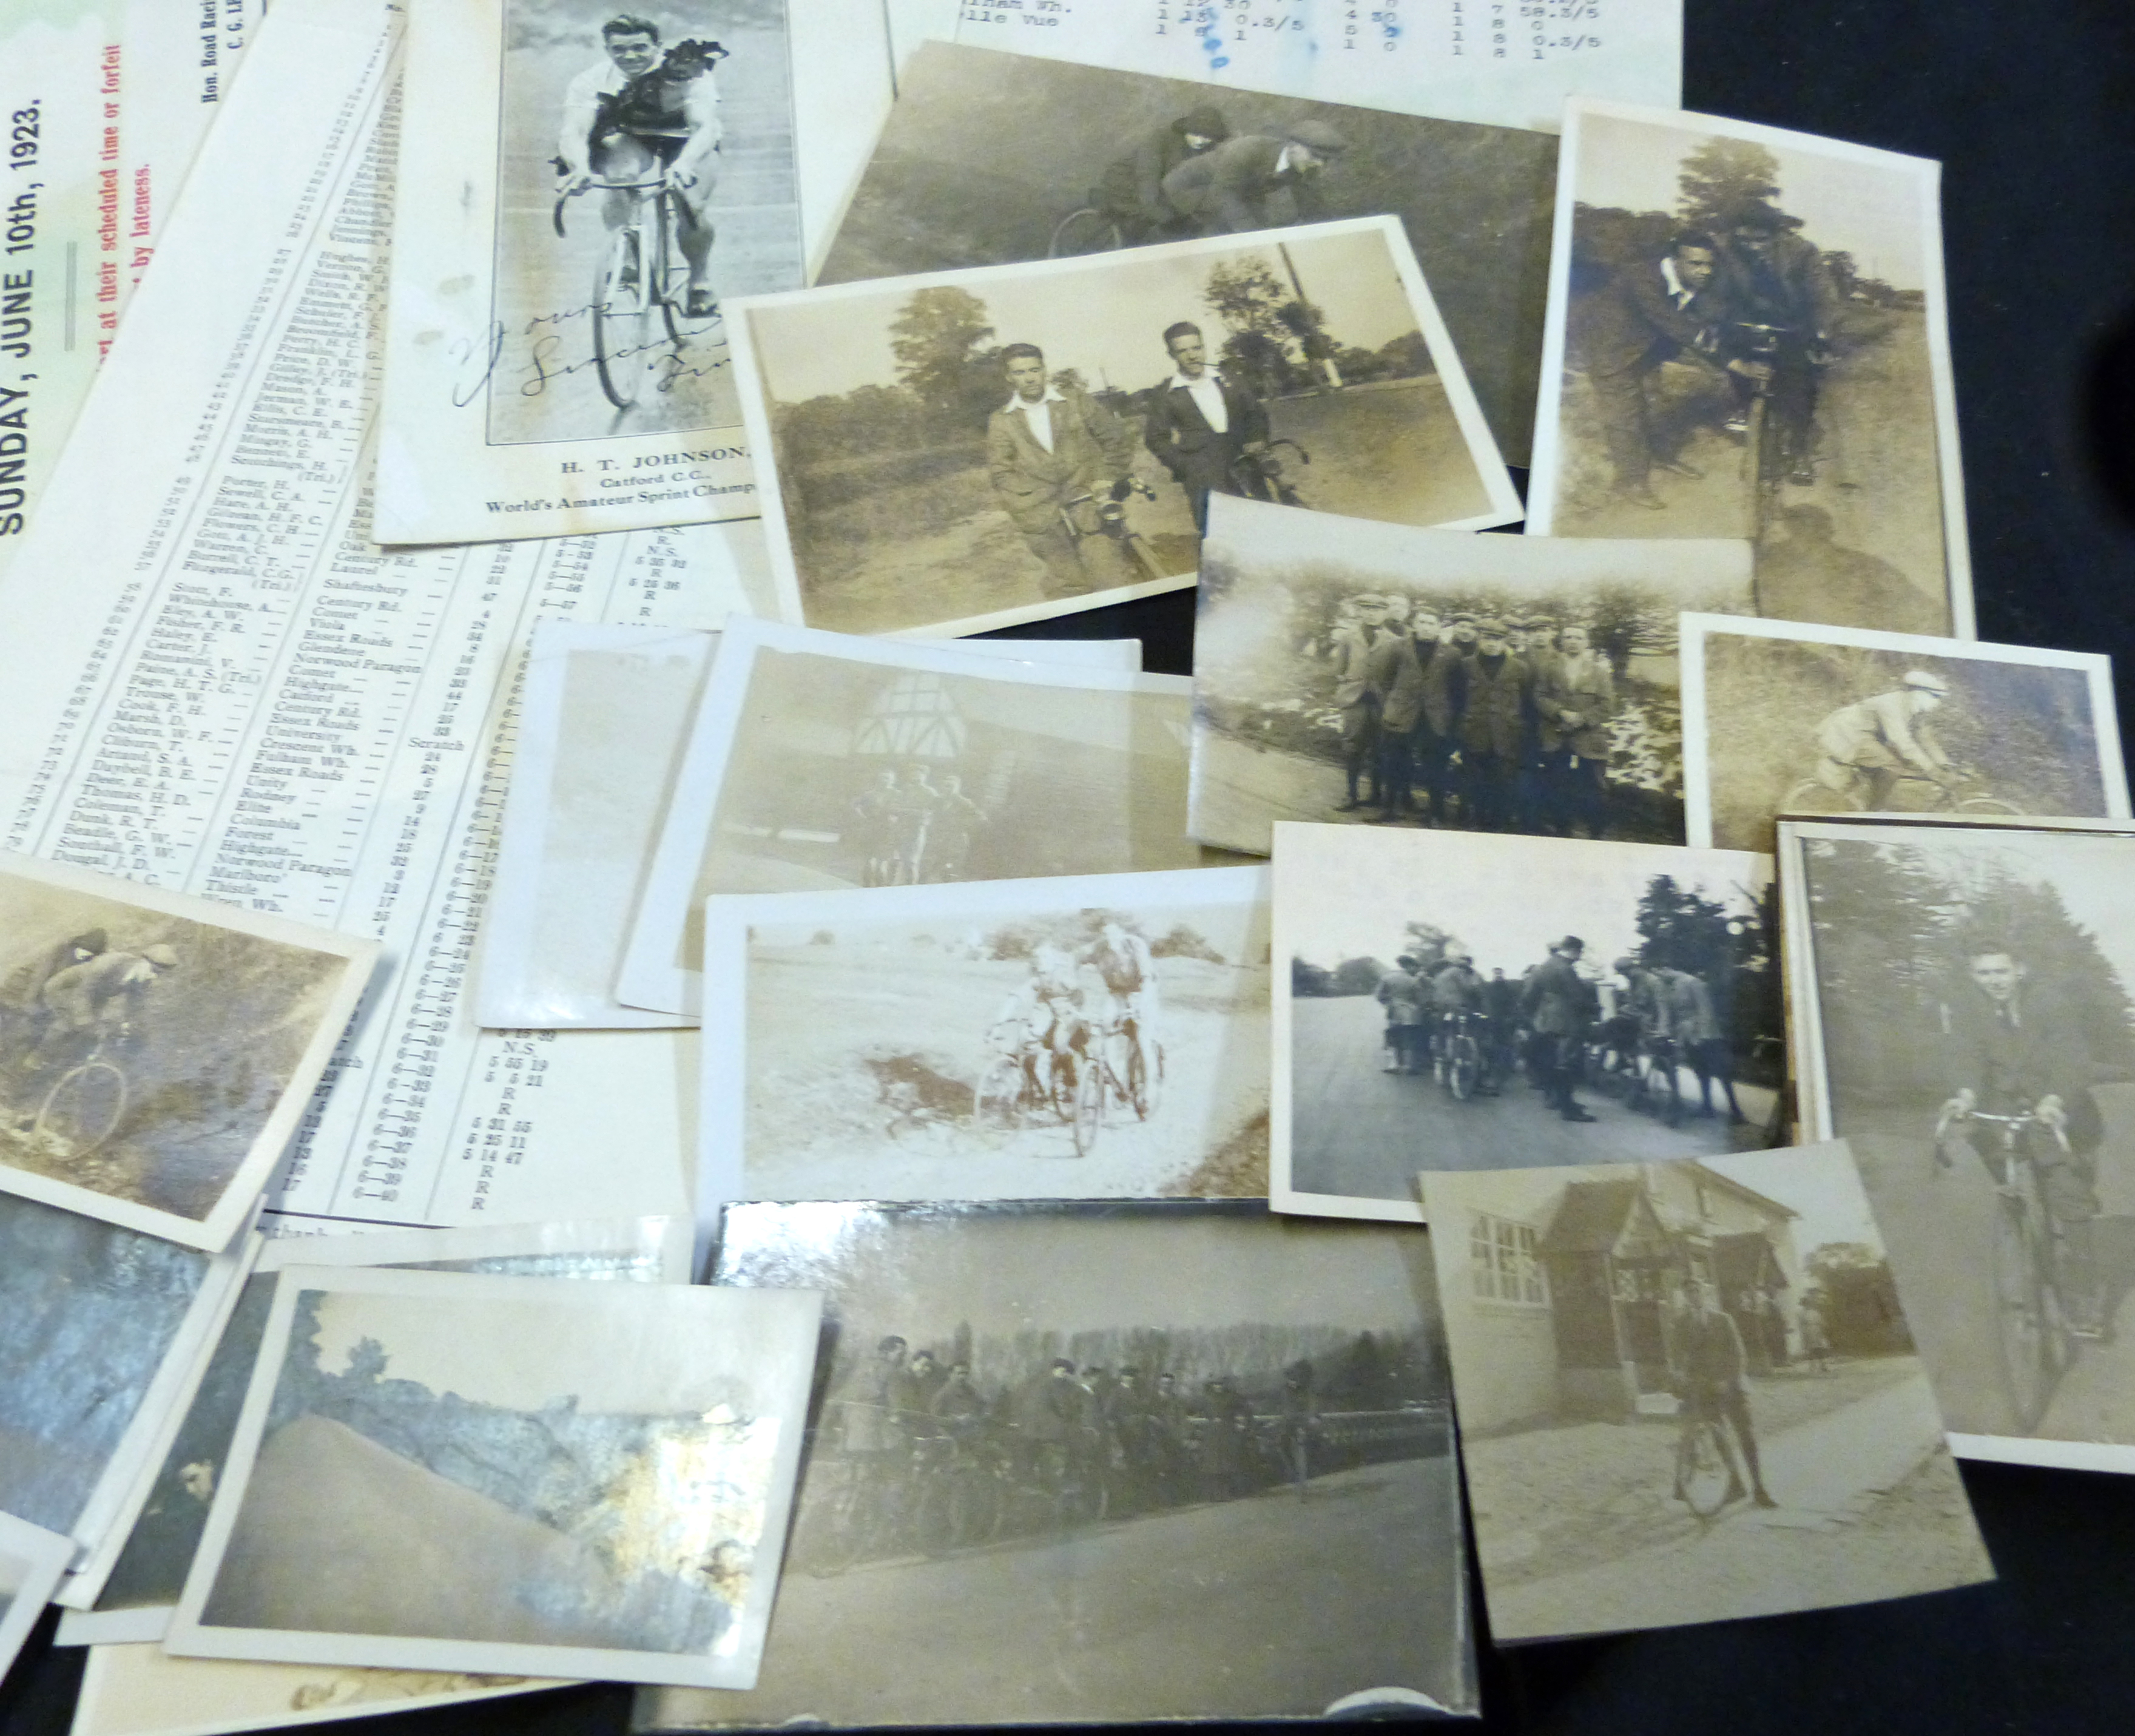 Packet: Cycling Club ephemera and photographs from early 1920s including race meet information, - Image 2 of 2